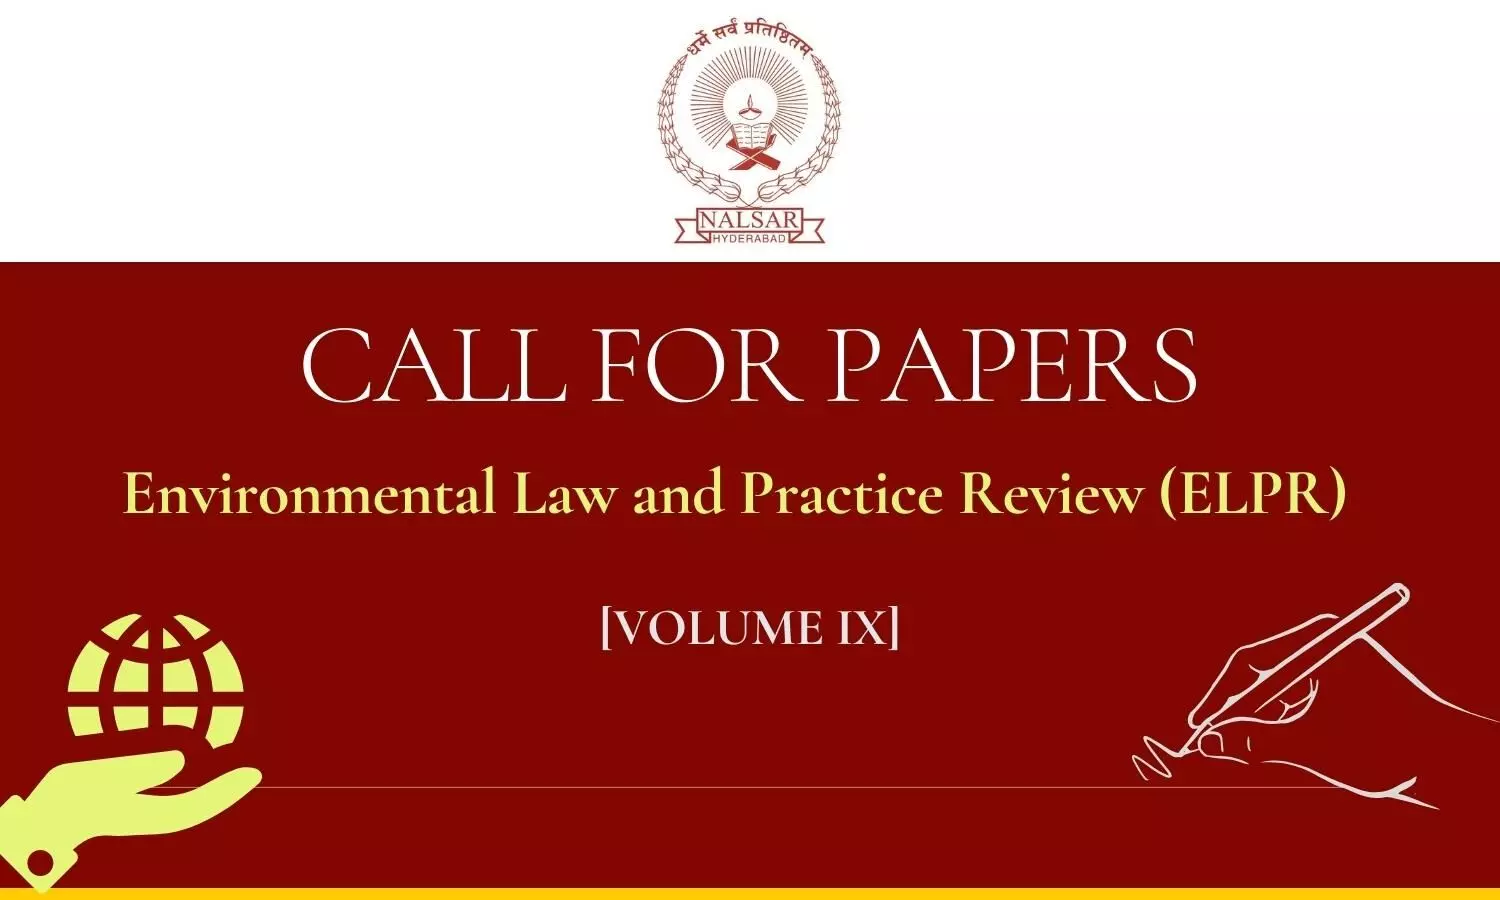 Call for Papers: Environmental Law and Practice Review (ELPR) Volume 9 | NALSAR Hyderabad